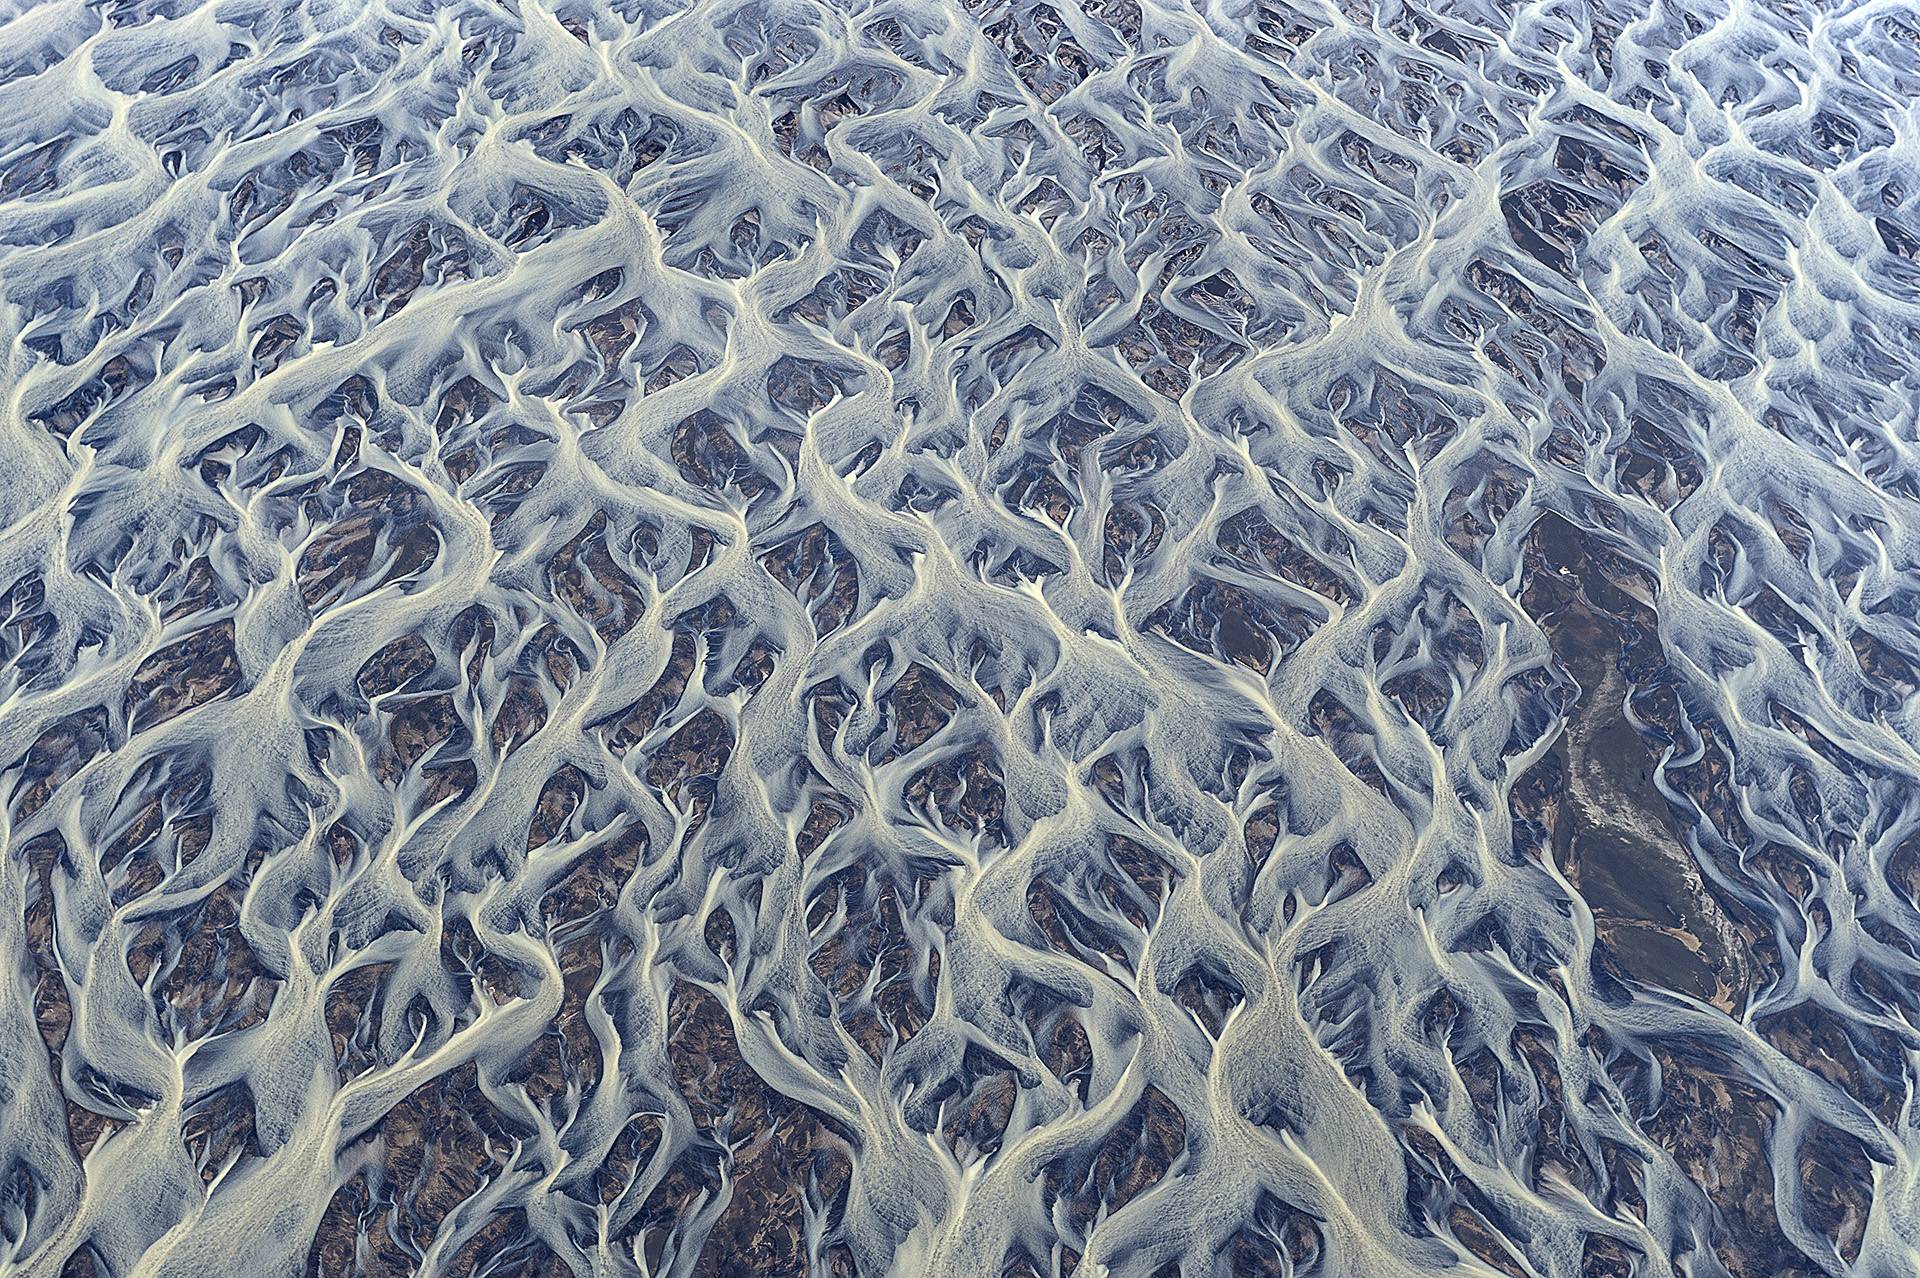 satisfying pic rivers of iceland